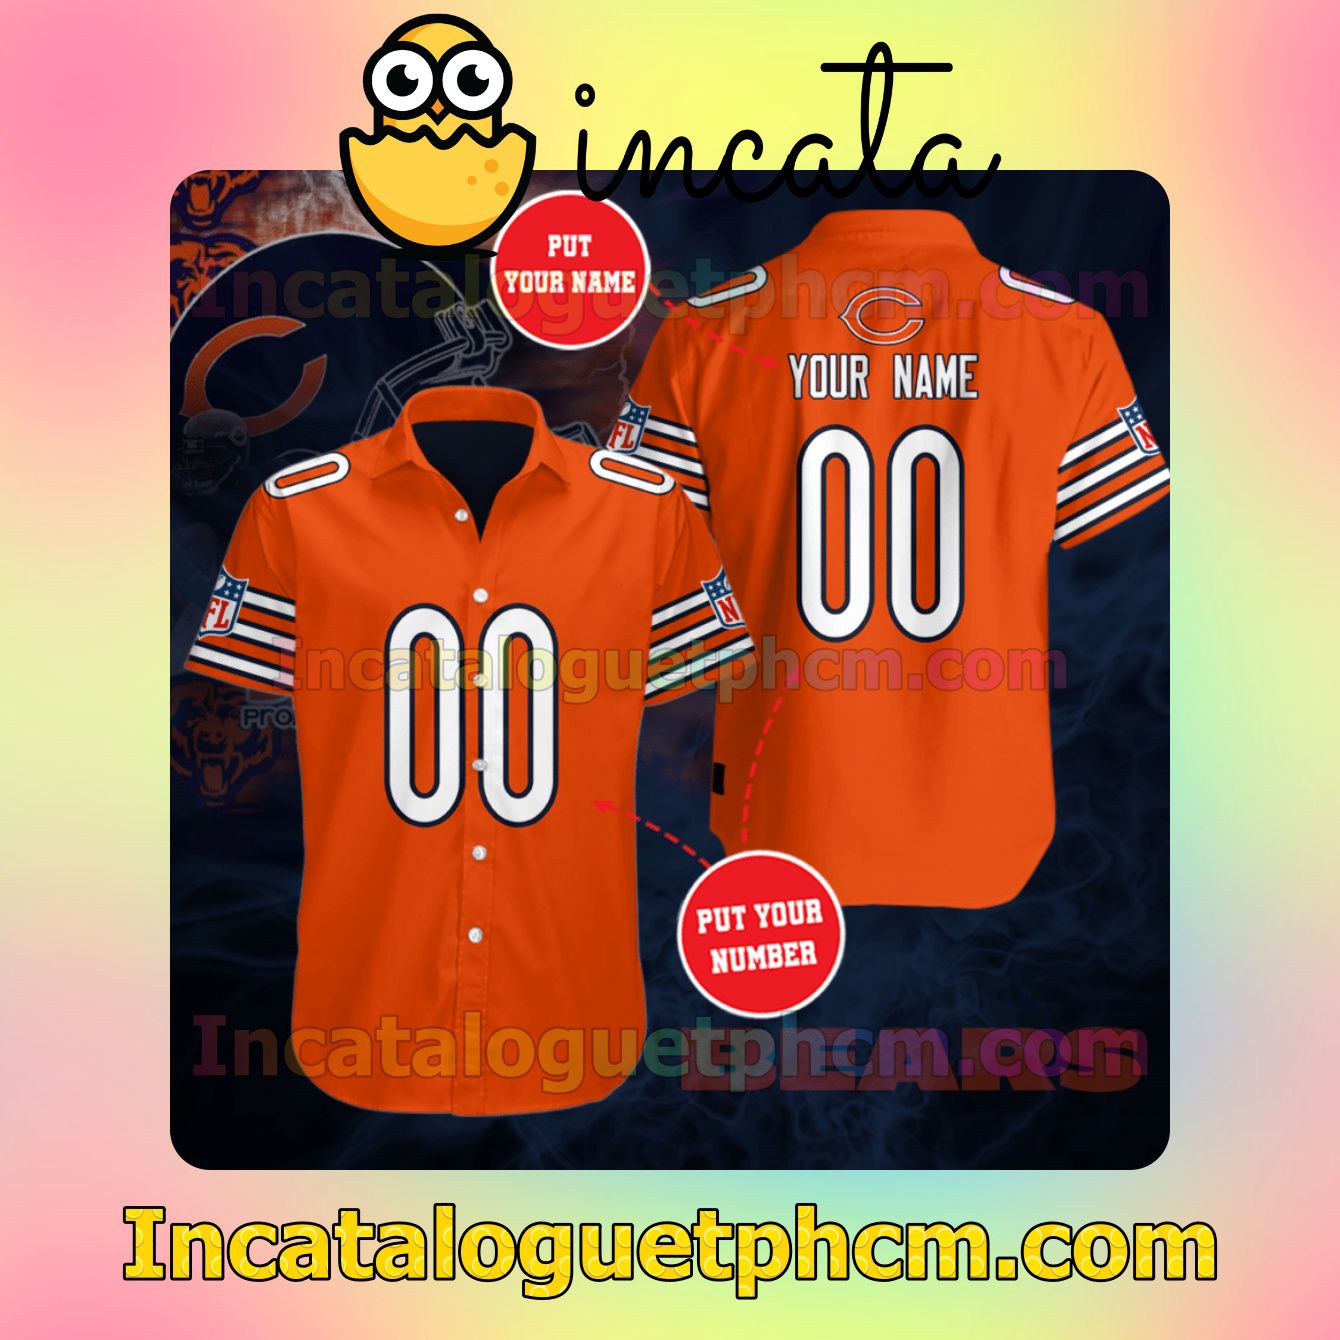 Personalized Chicago Bears Orange Button Shirt And Swim Trunk